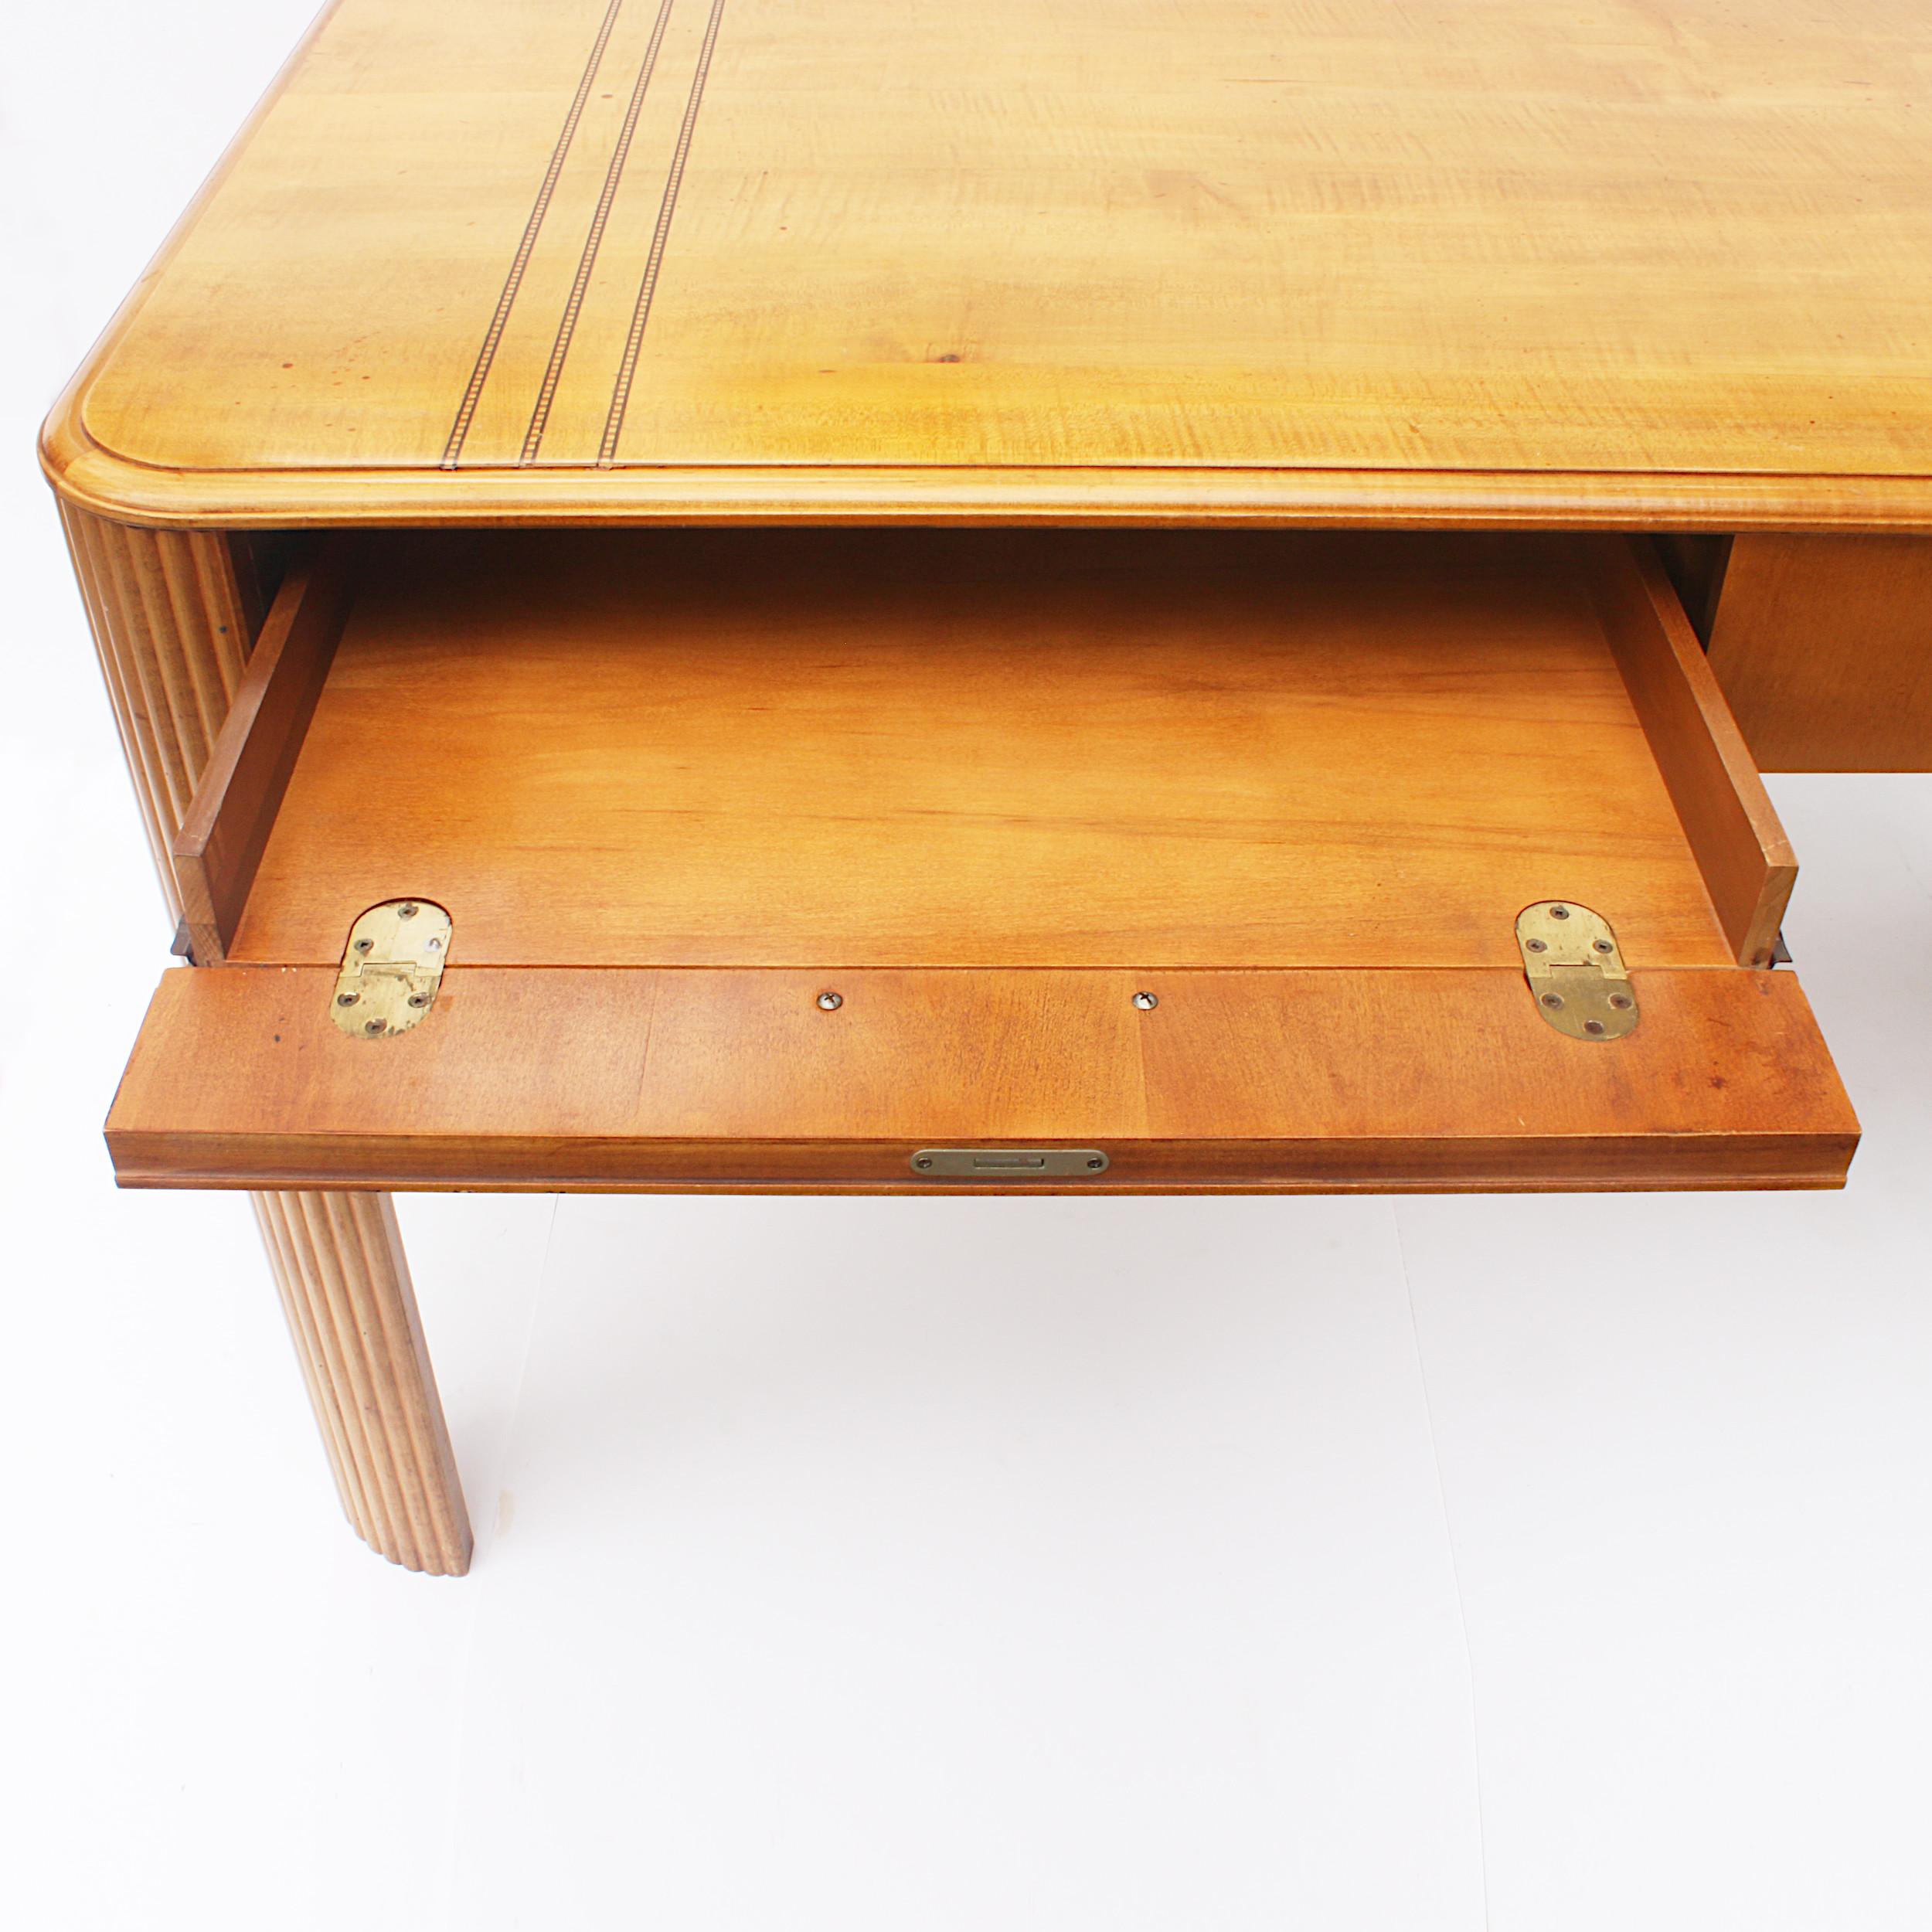 Late 20th Century Vintage Burled Elm Art Deco Revival Writing Table Desk by Jim Peed for Romweber